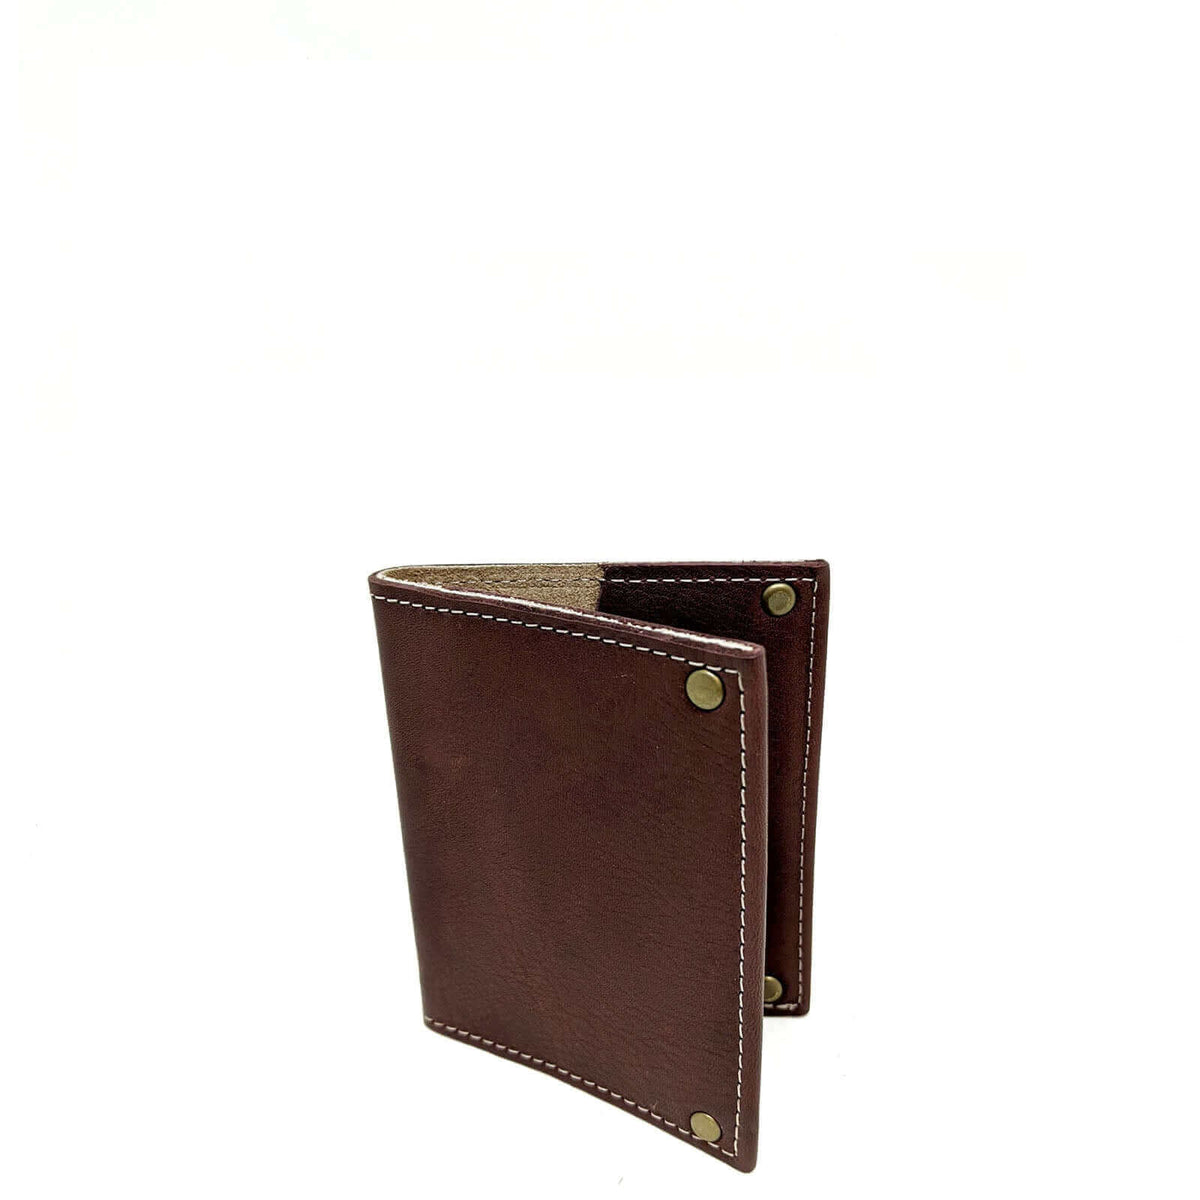 Wine Brown leather flap wallet, Brynn Capella, made in the USA